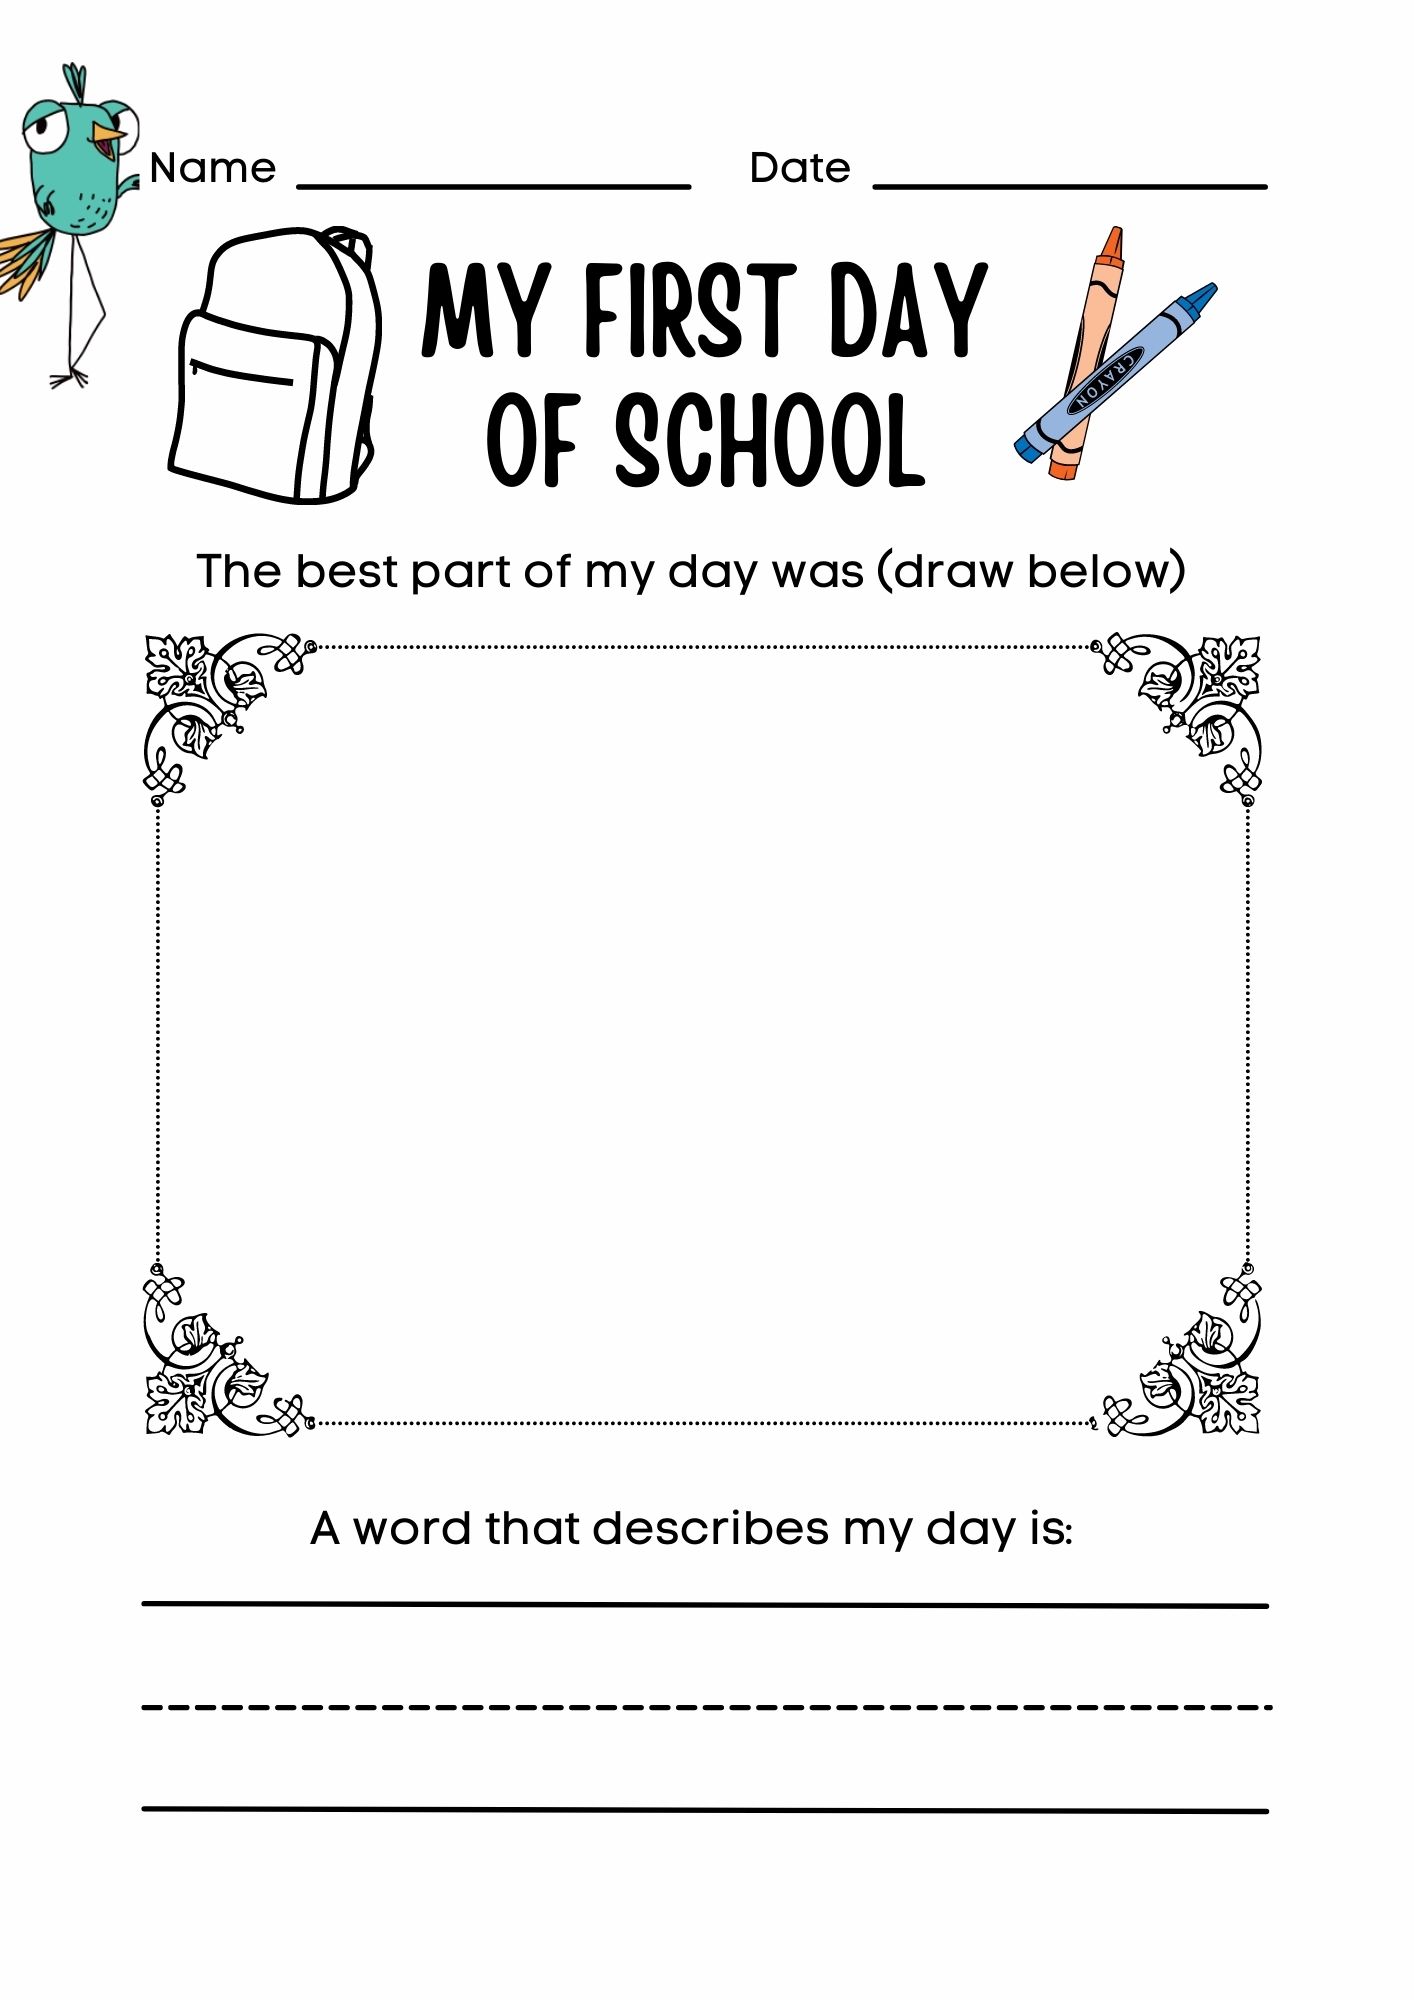 First Day of School Activities image